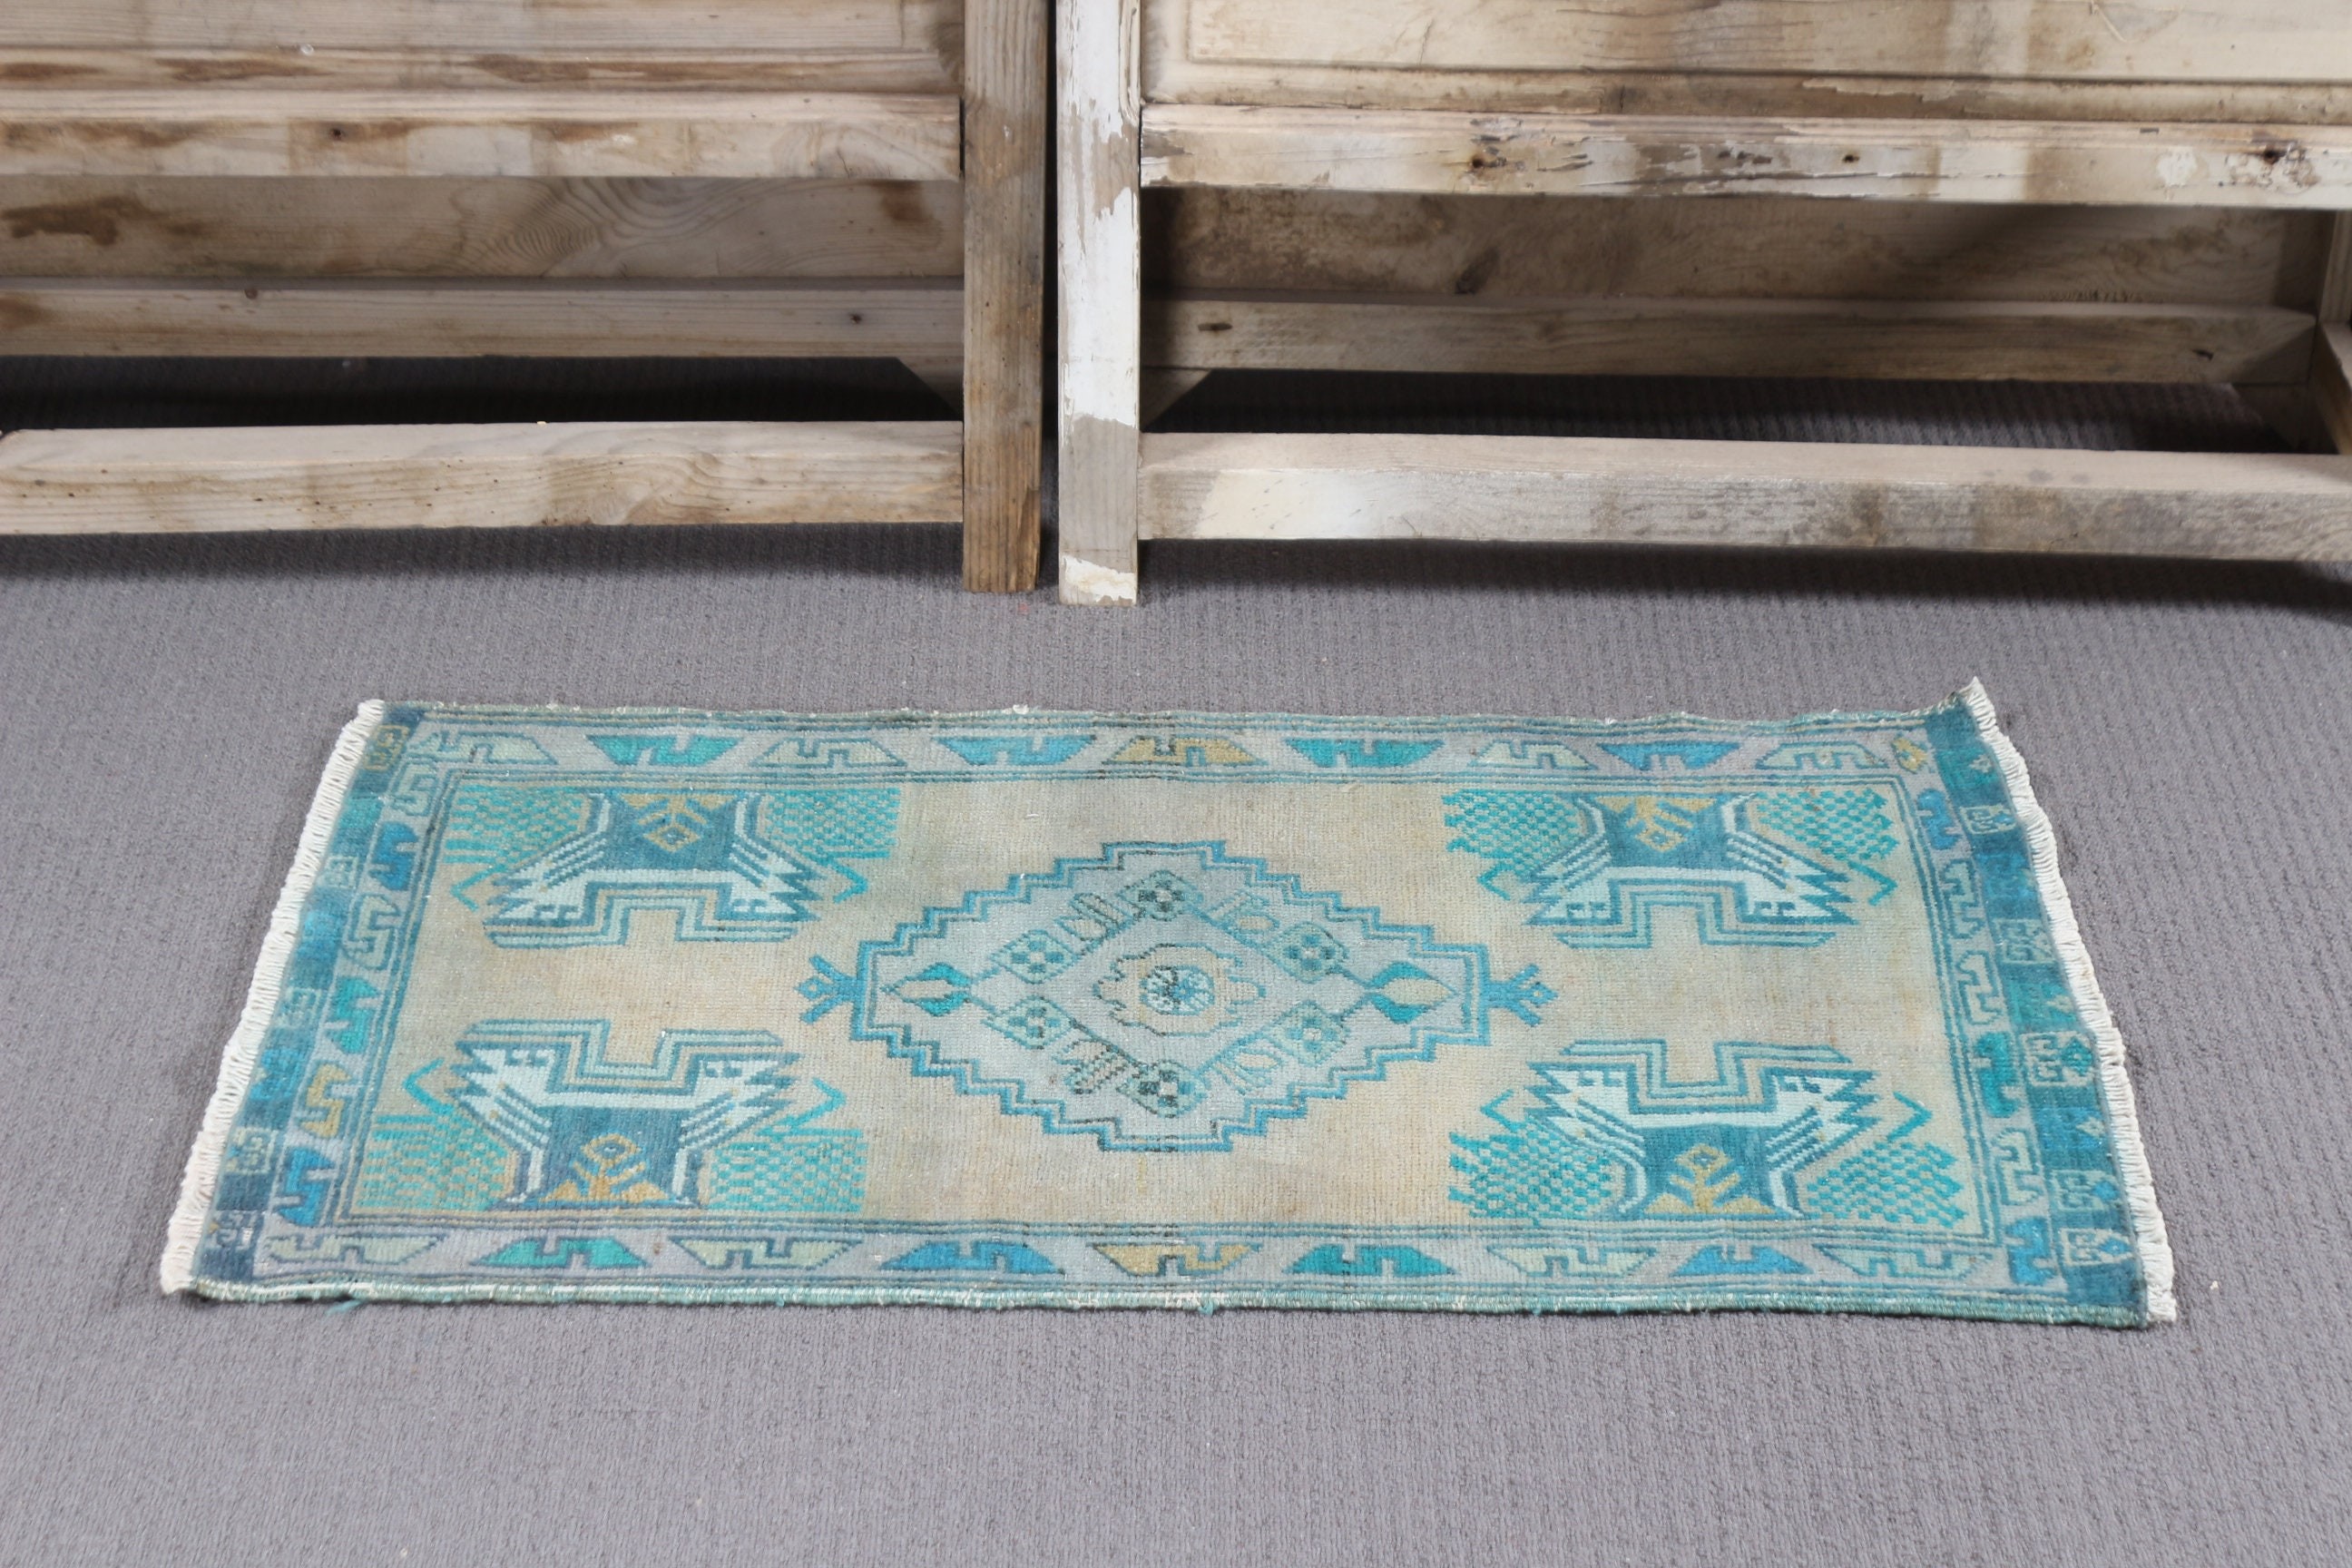 Rugs for Entry, Vintage Rugs, Moroccan Rug, Ethnic Rug, Bath Rug, 1.7x2.9 ft Small Rugs, Kitchen Rug, Blue Kitchen Rug, Turkish Rugs